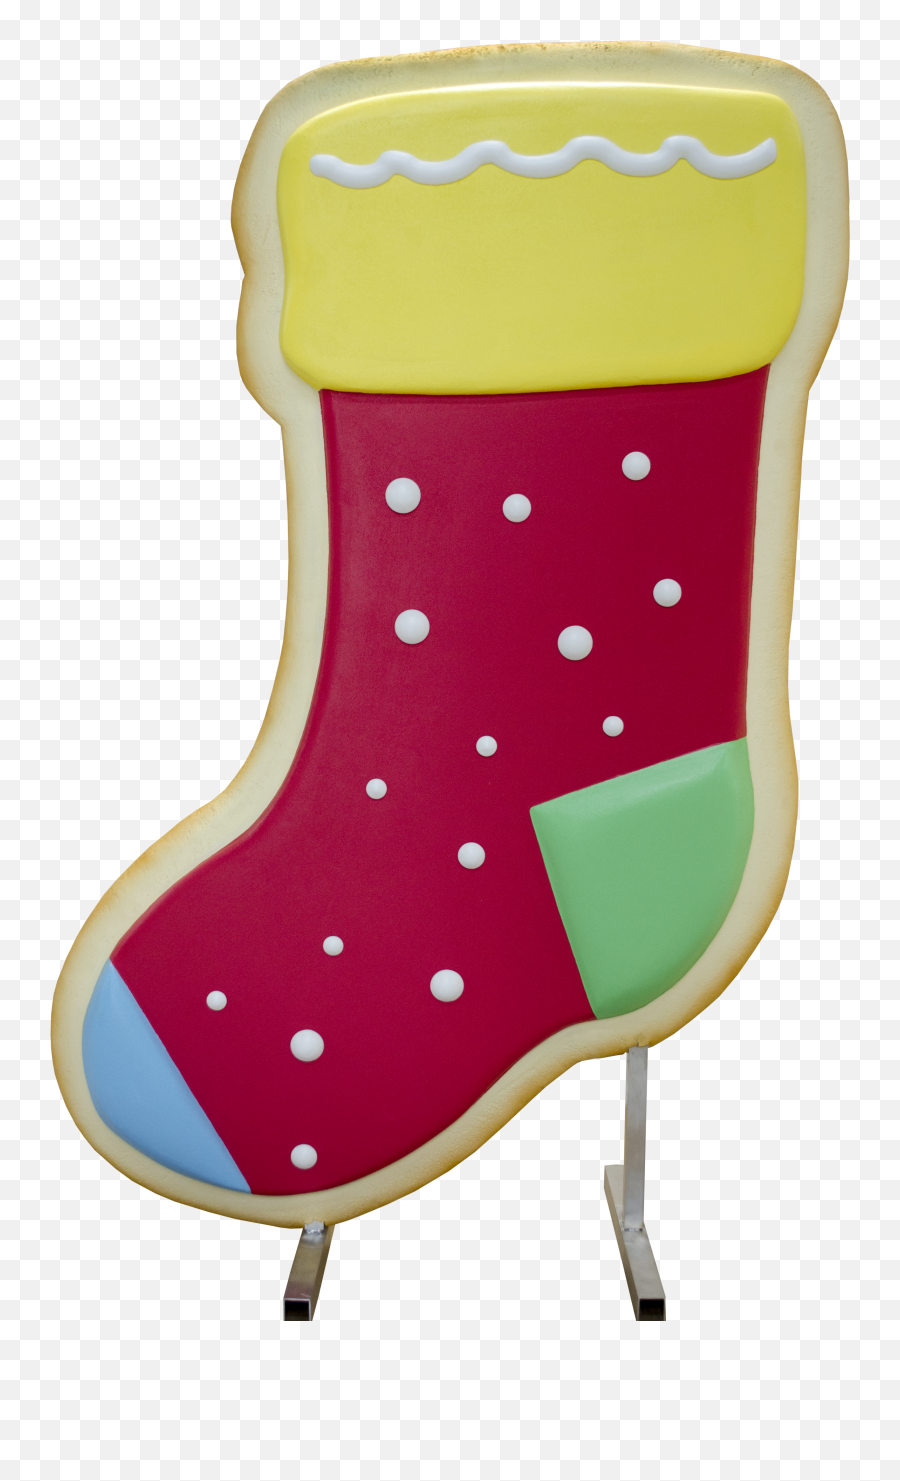 Christmas Cookies Keen Designs Inc Png Stocking